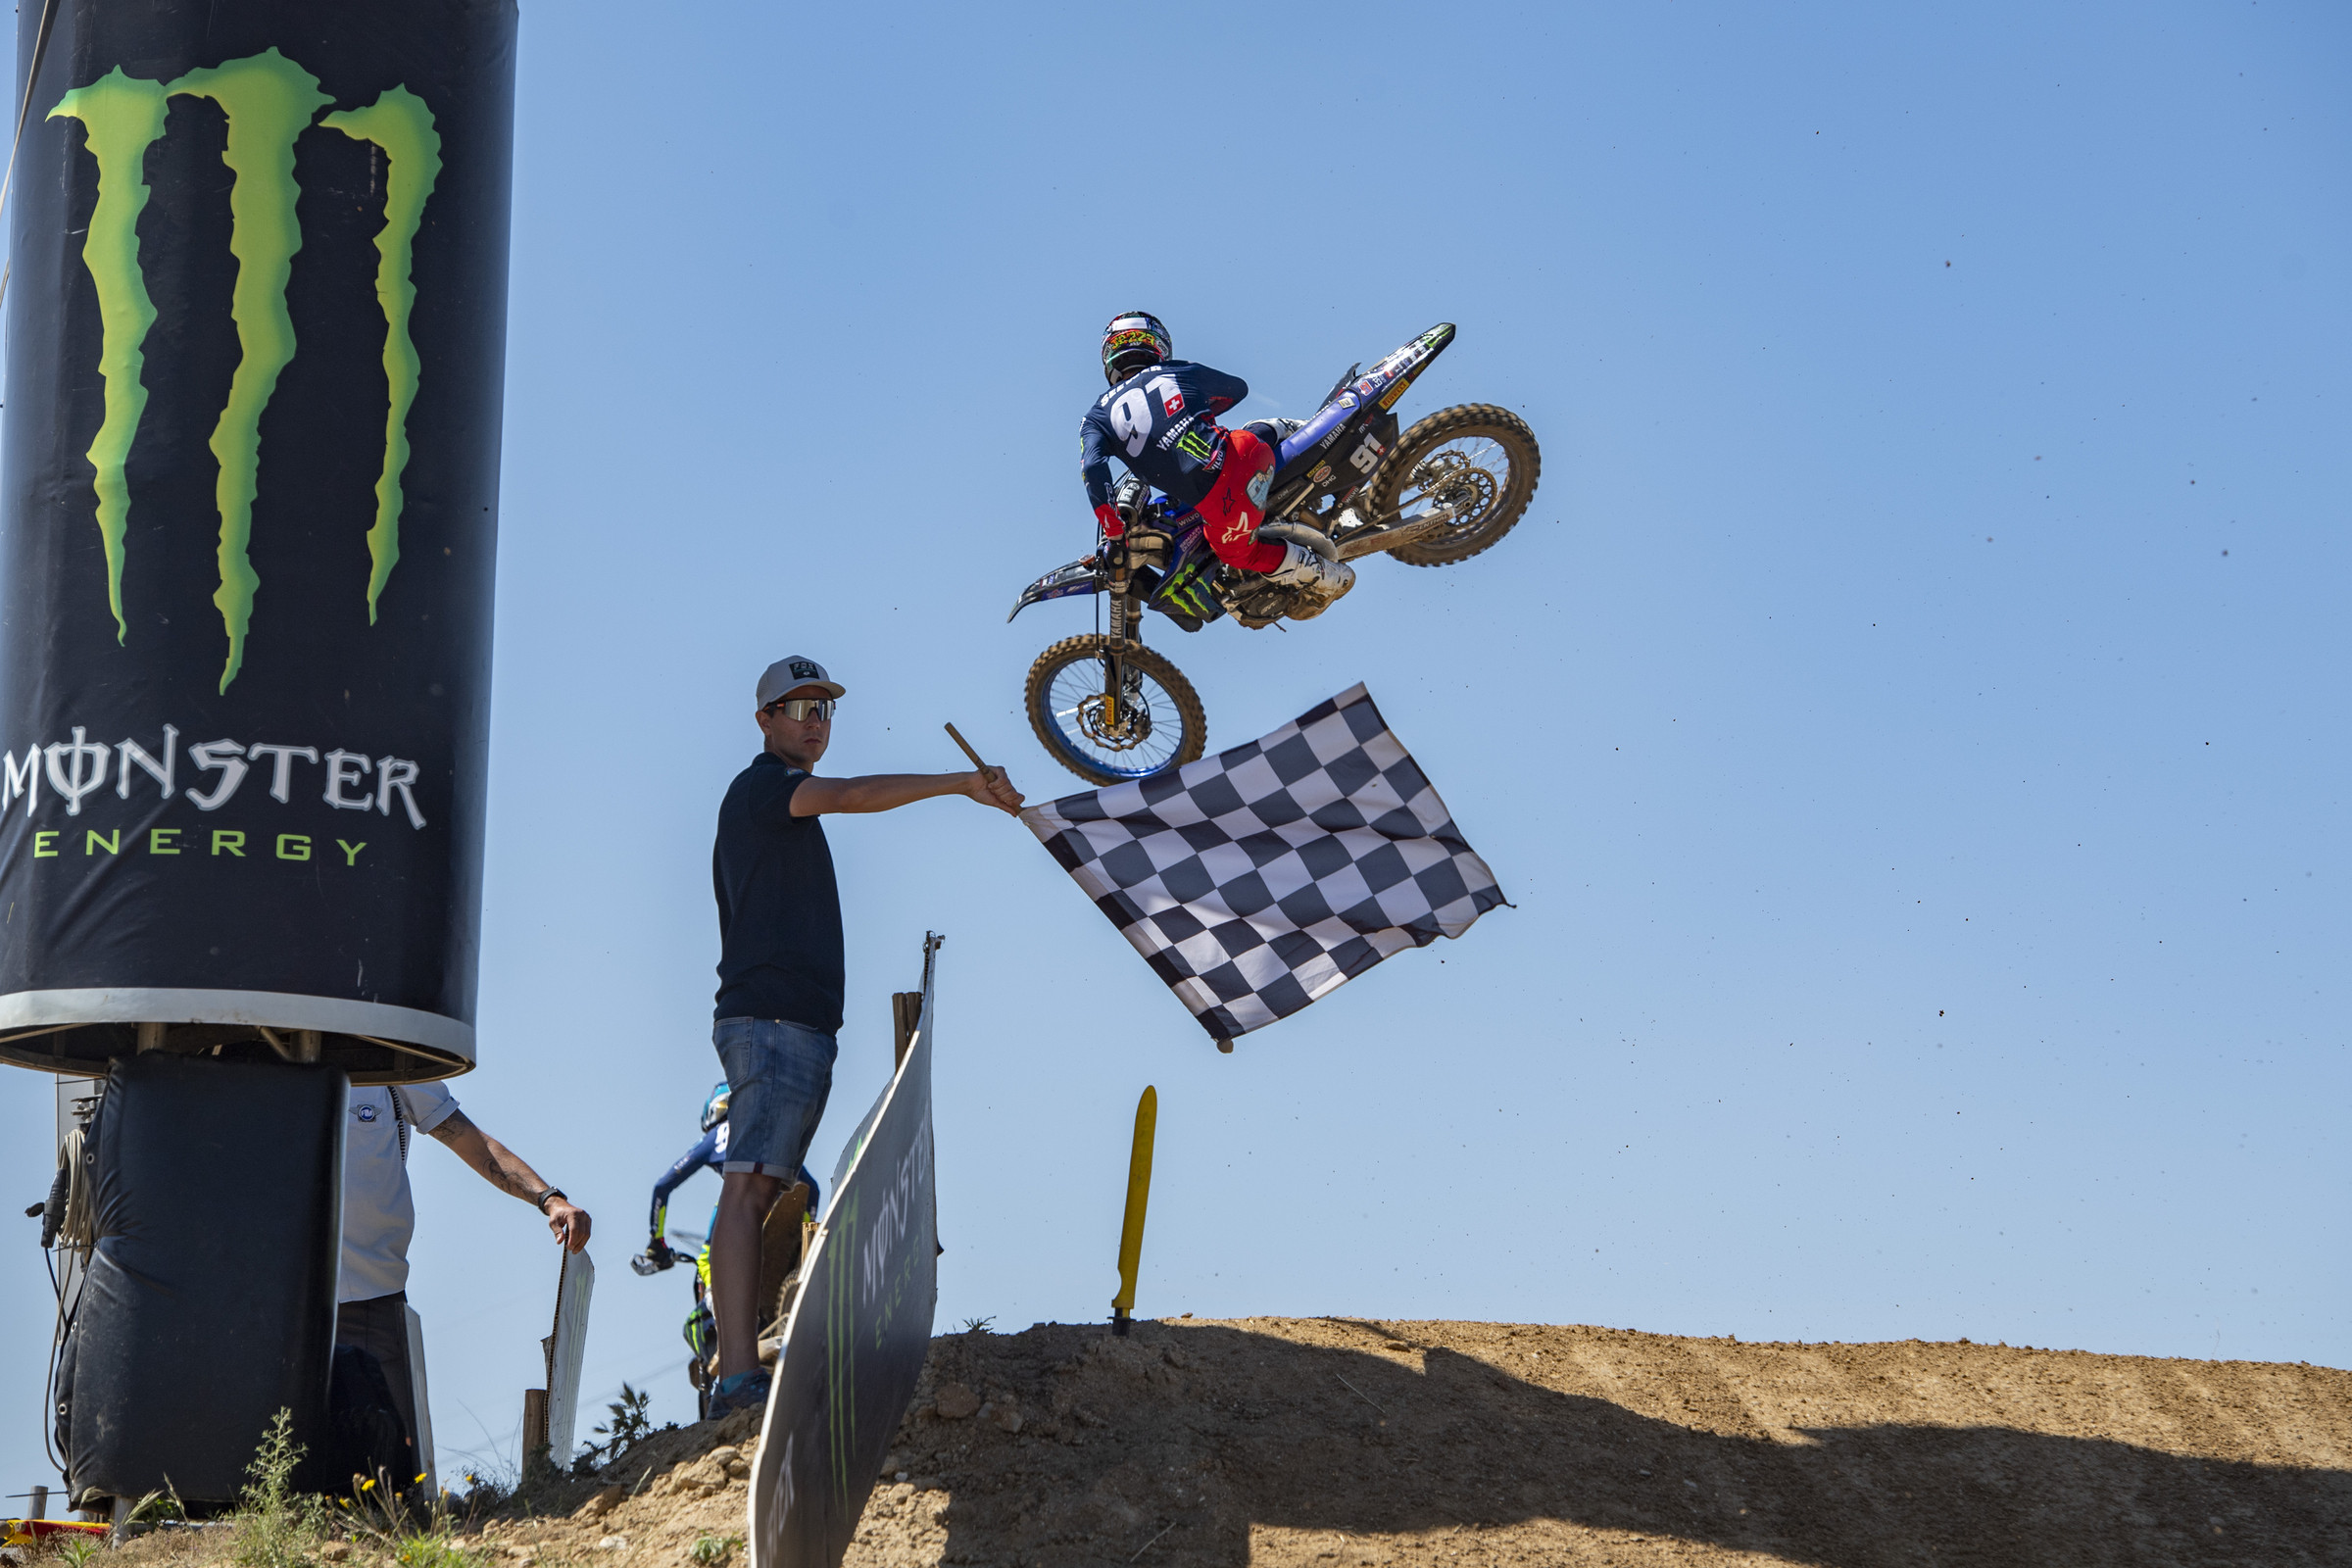 Written and Audio Podcast Recap from 2022 MXGP of France